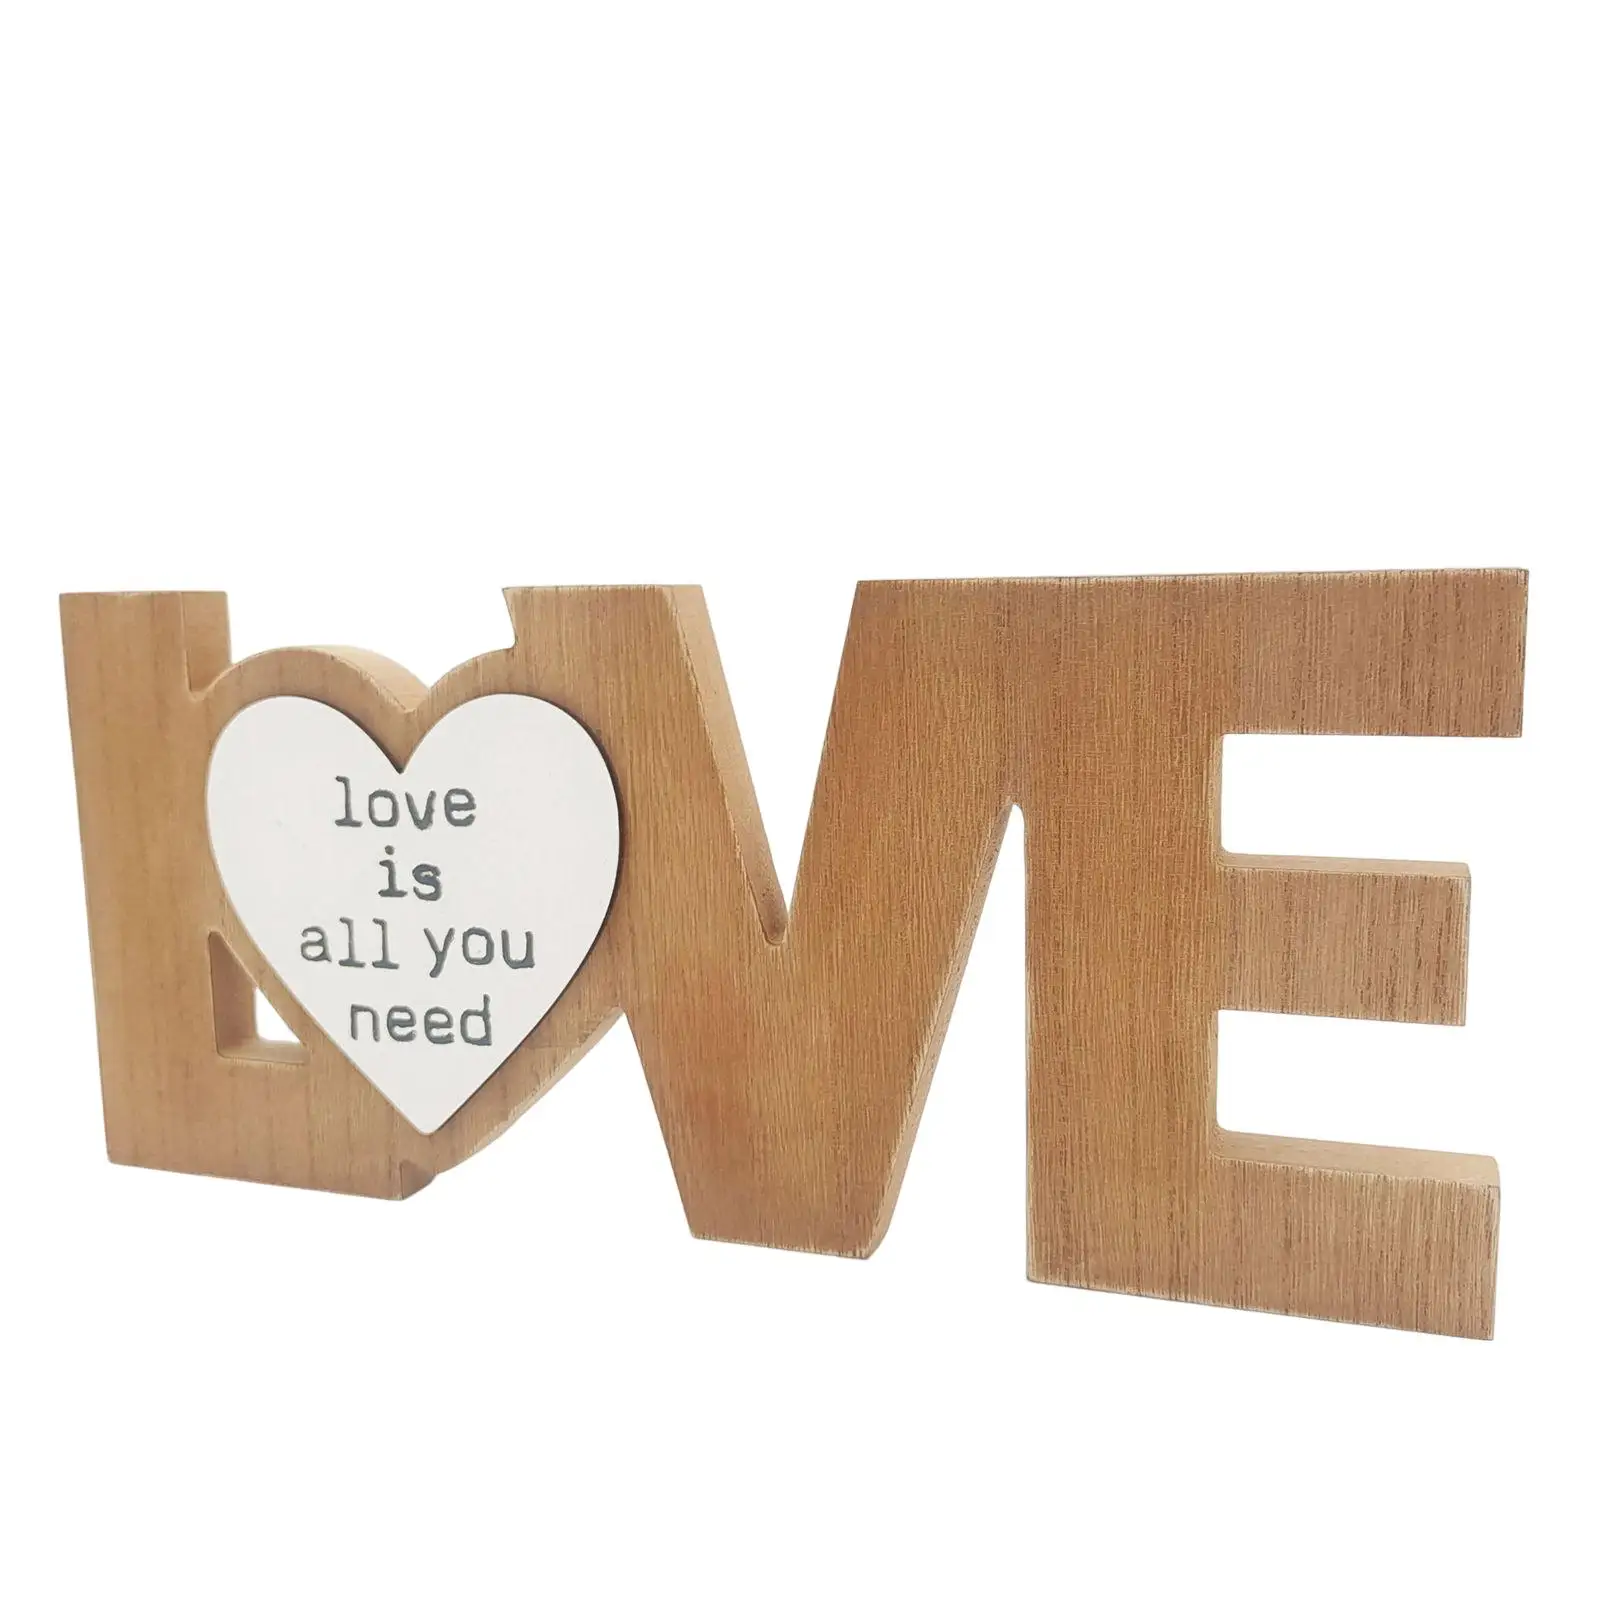 Wood Cutout Love Letters Sign Free Standing for Room Fireplace Modern Sturdy